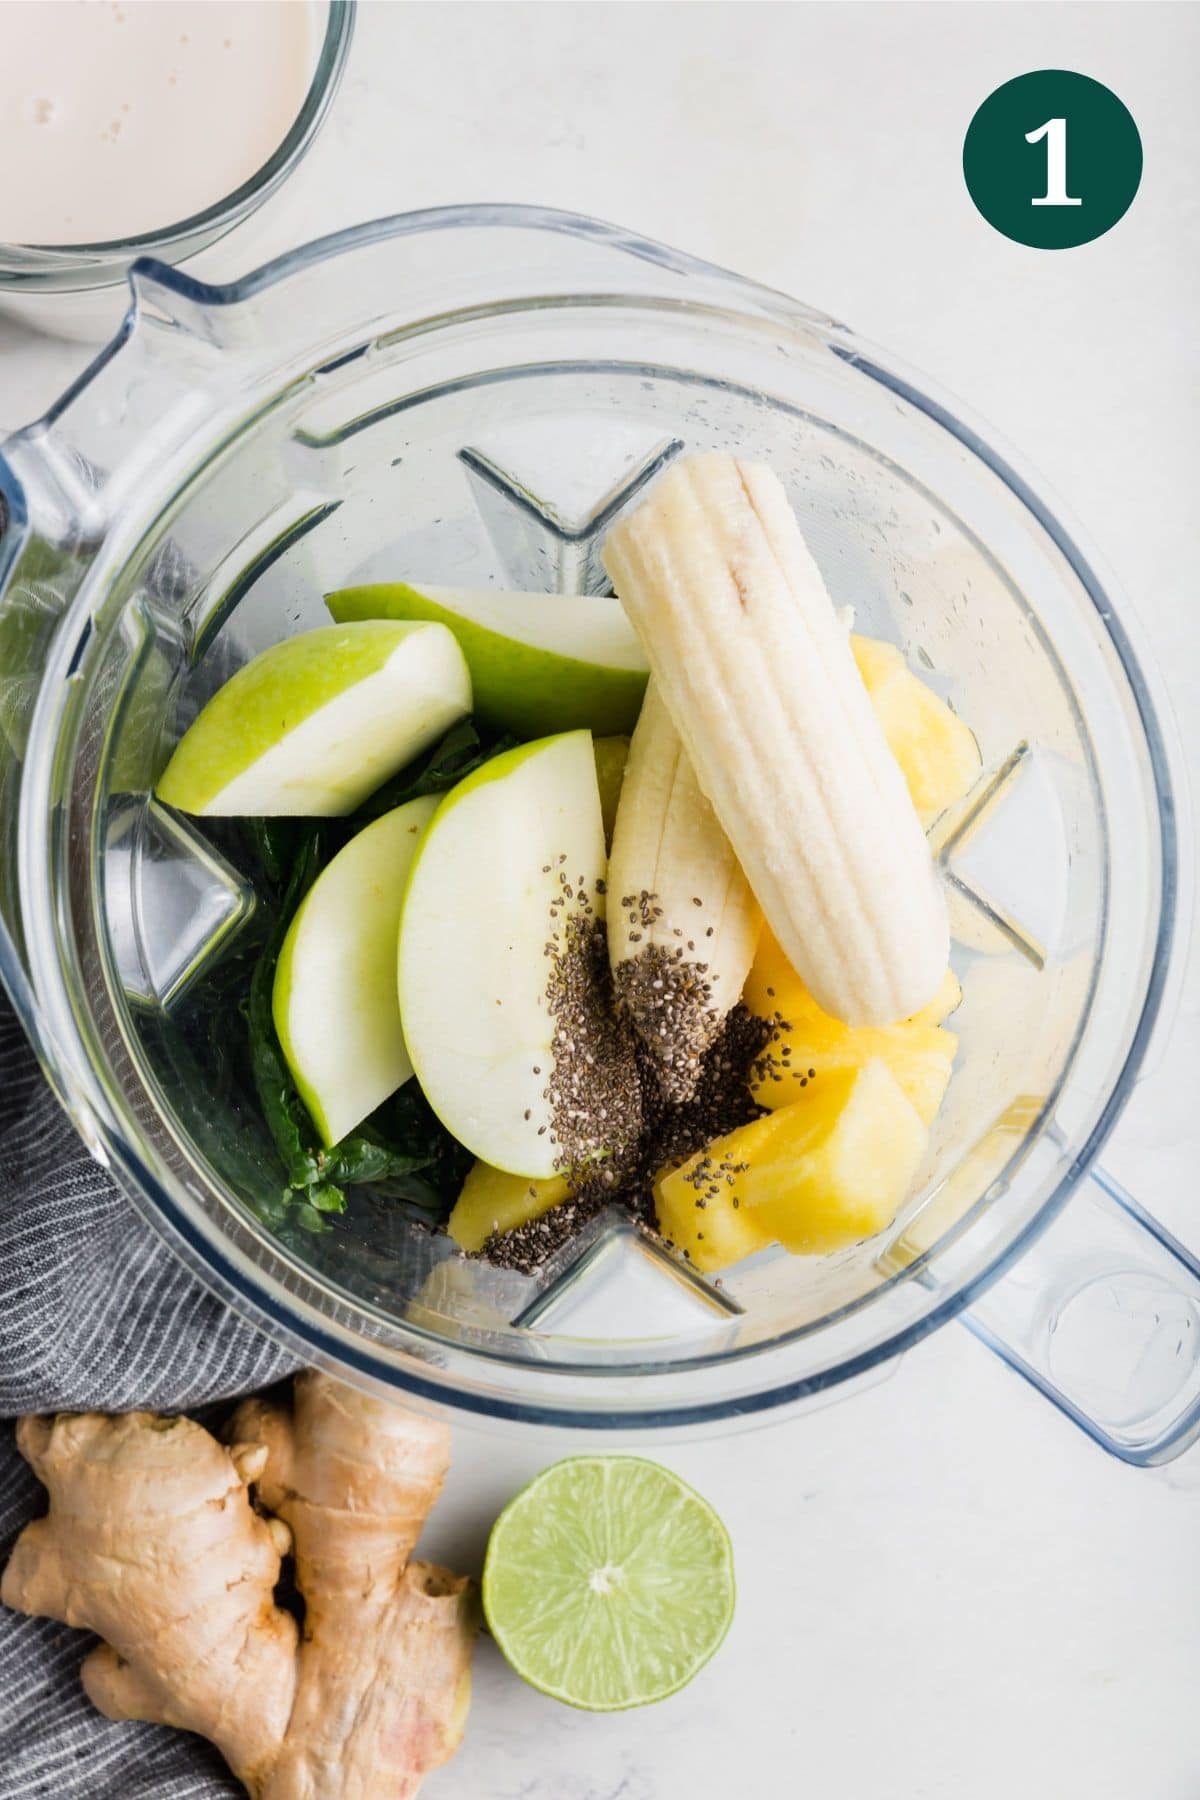 A blender with banana, apple, chia seeds, and pineapple.